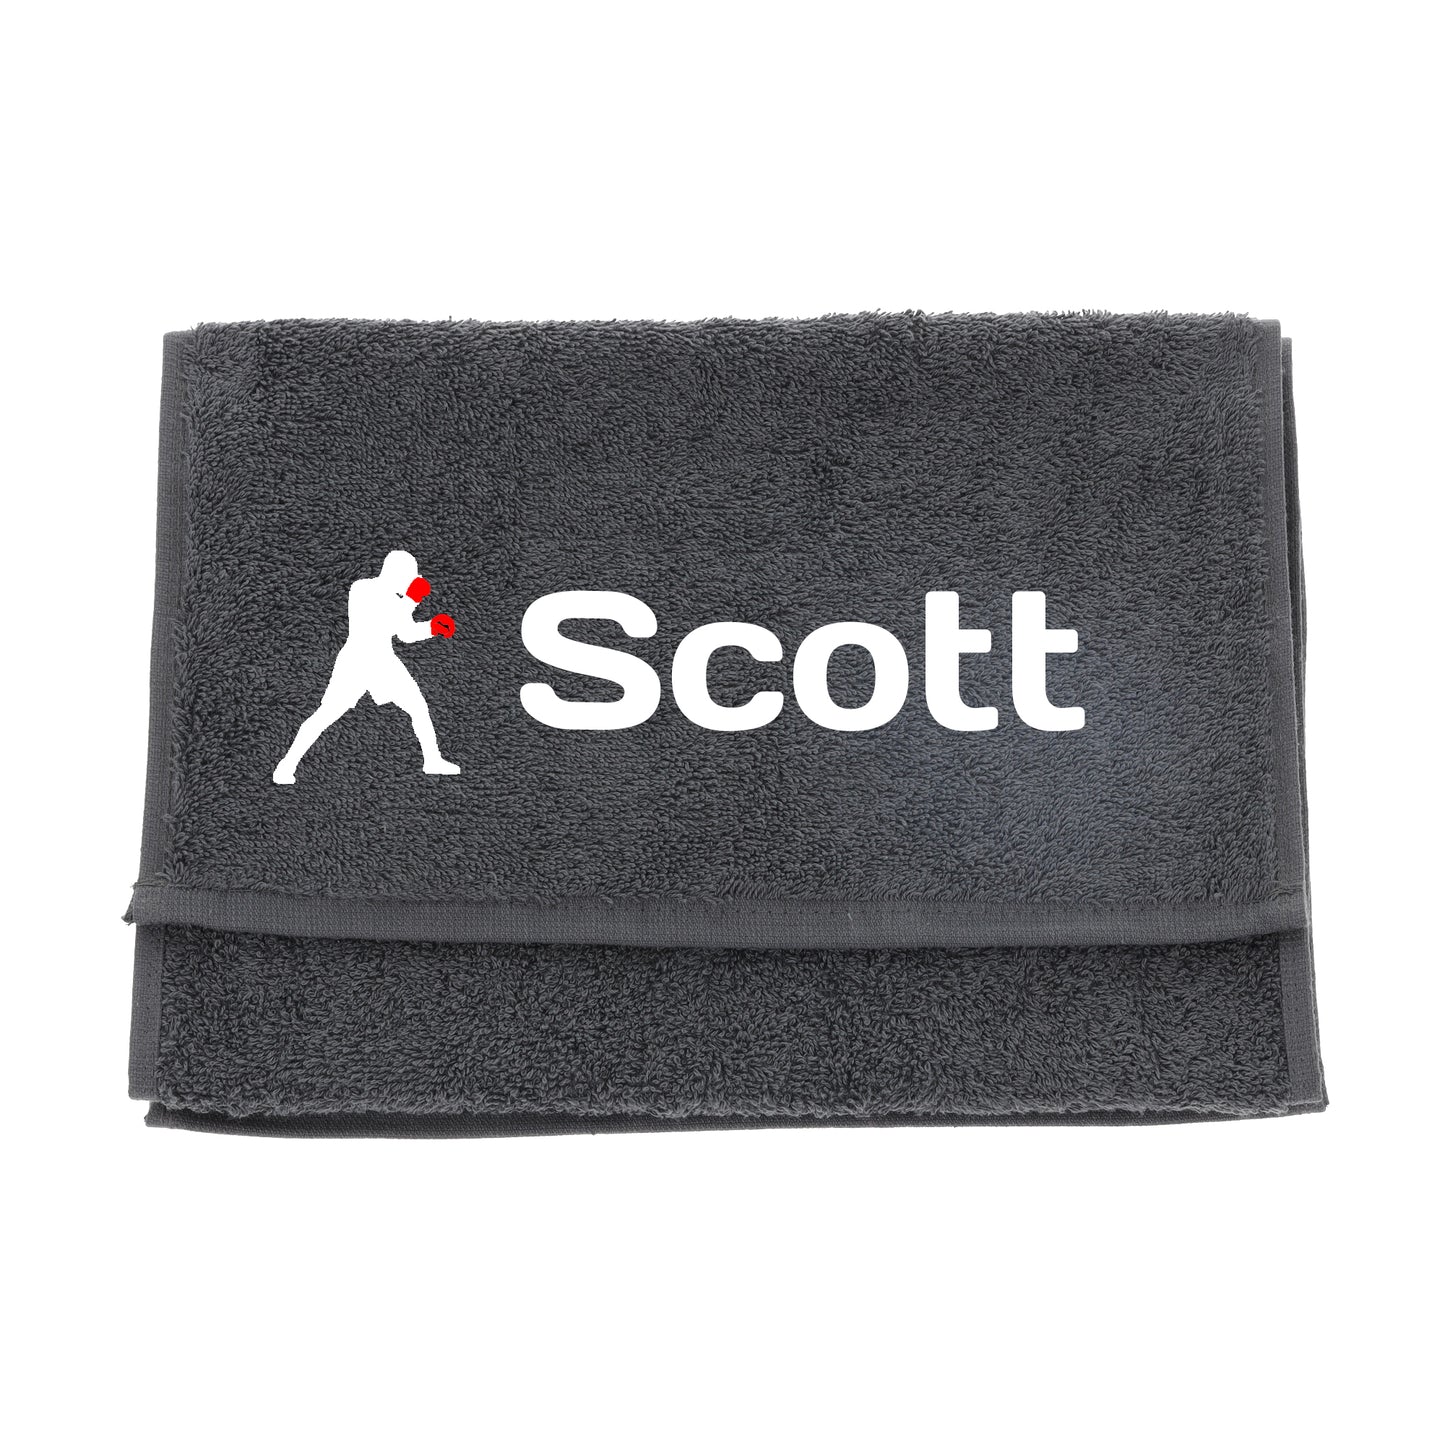 Personalised Embroidered Boxing Towel  - Always Looking Good - Slate Grey  